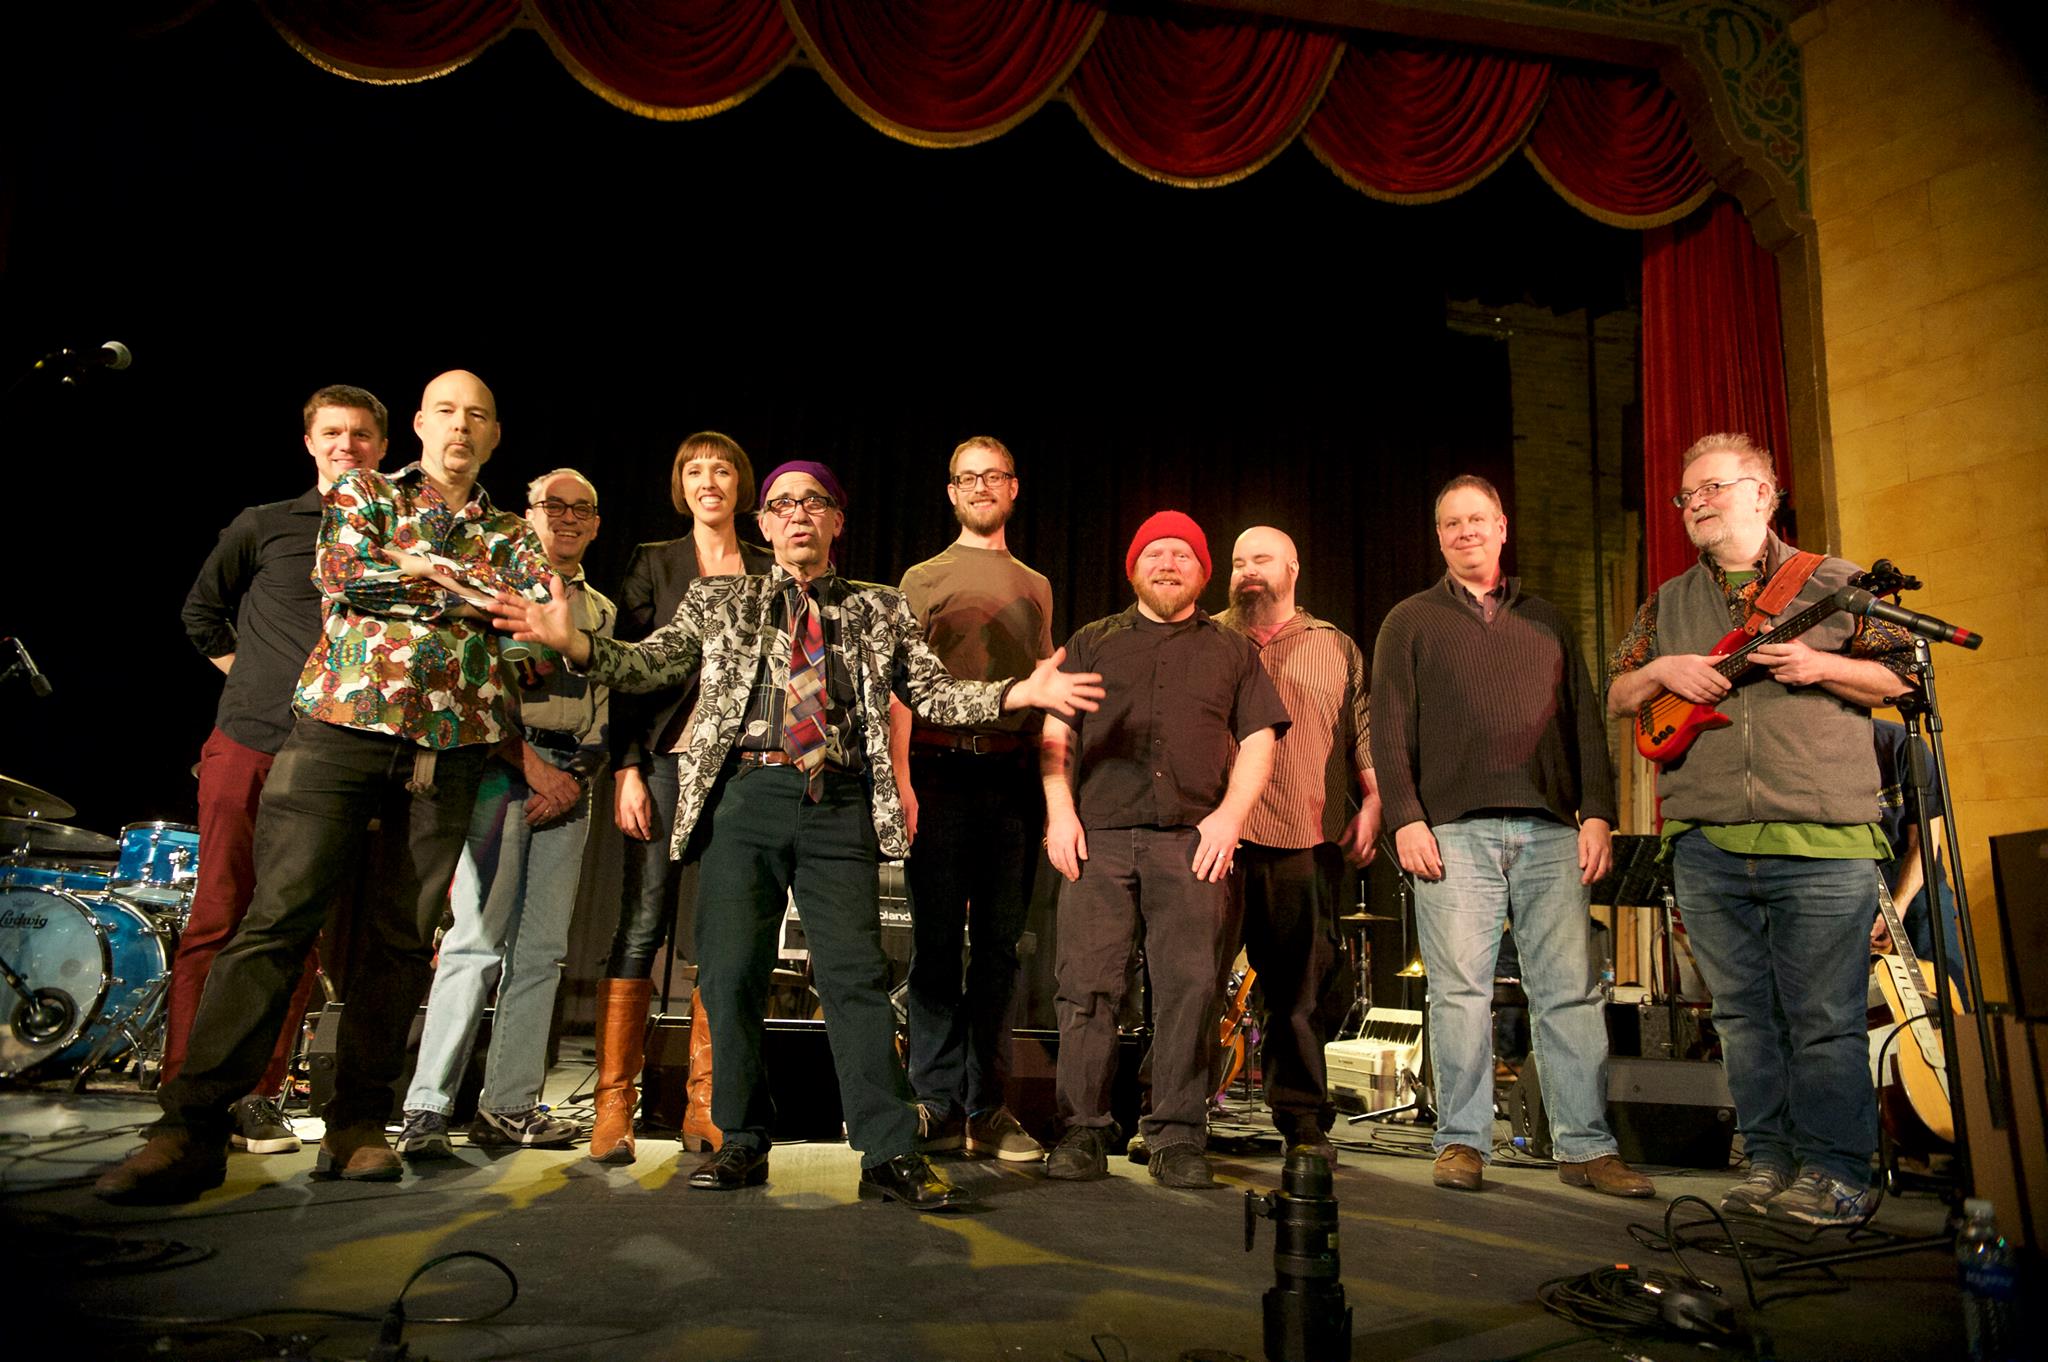 Captain Gravitone & the String Theory Orchestra’s